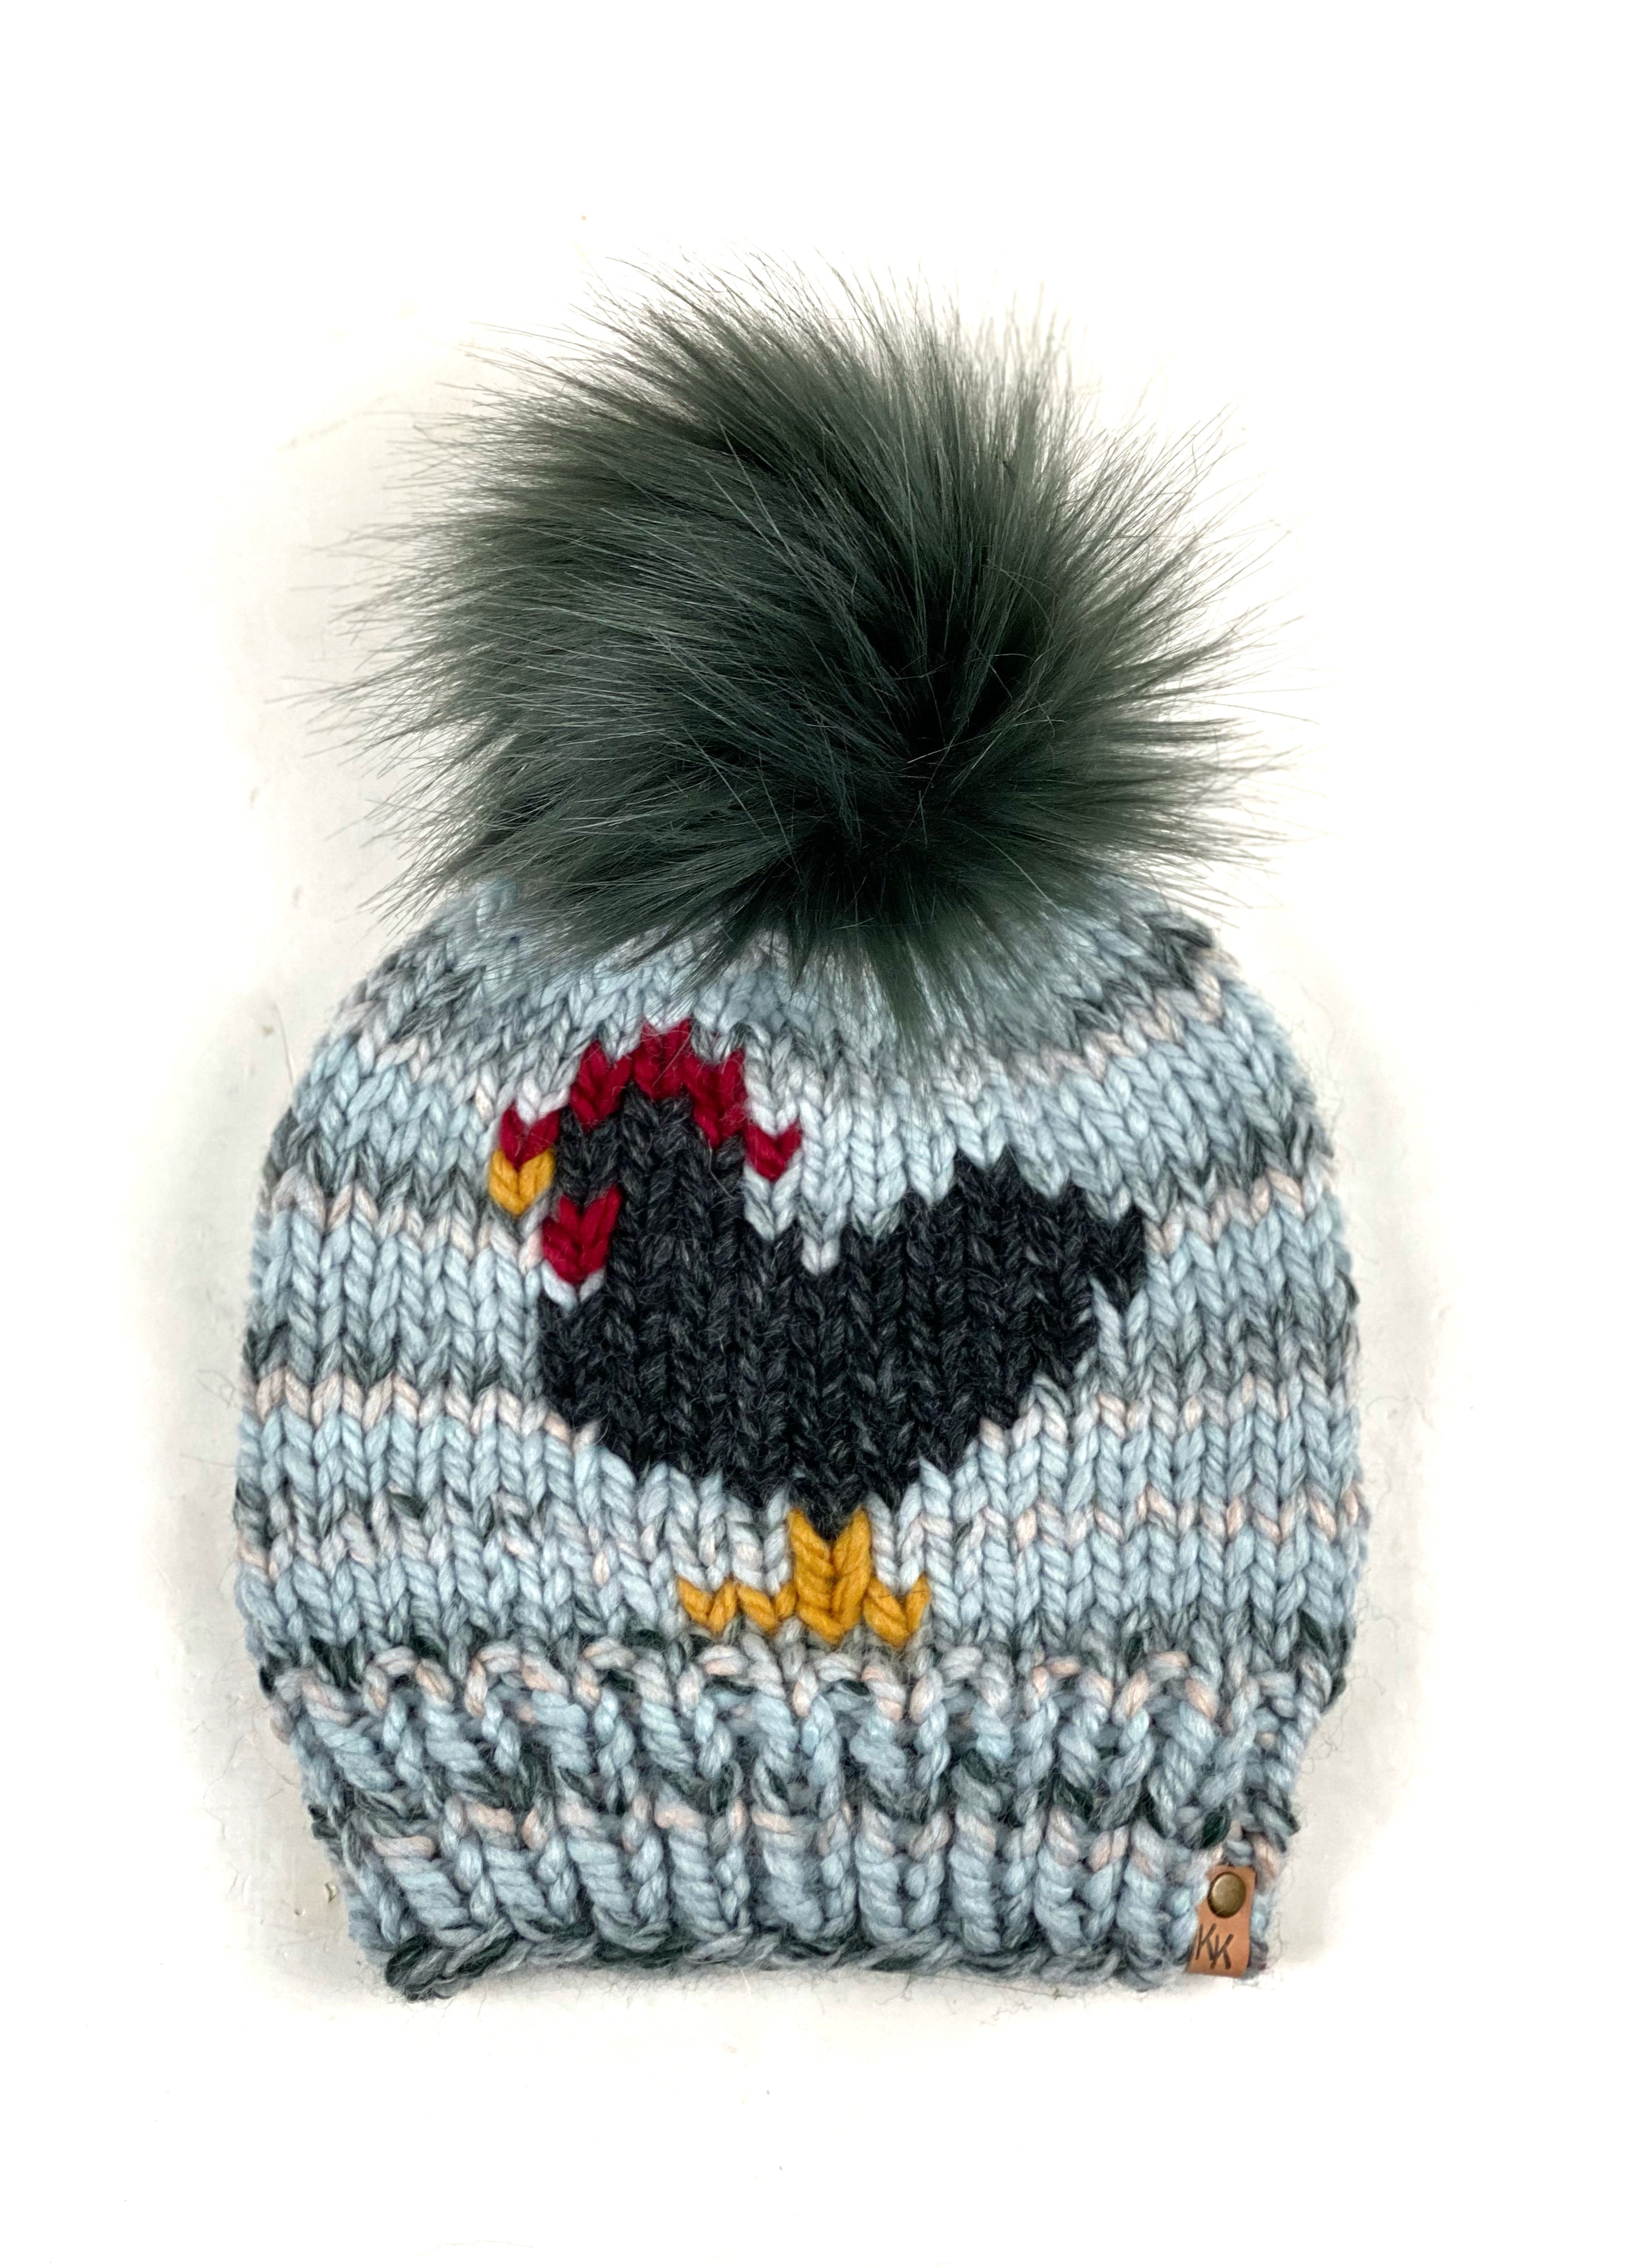 Chicken Hat in Arctic Ice Beanie Wool Blend Womens Adult Hat Faux Fur Pom RTS